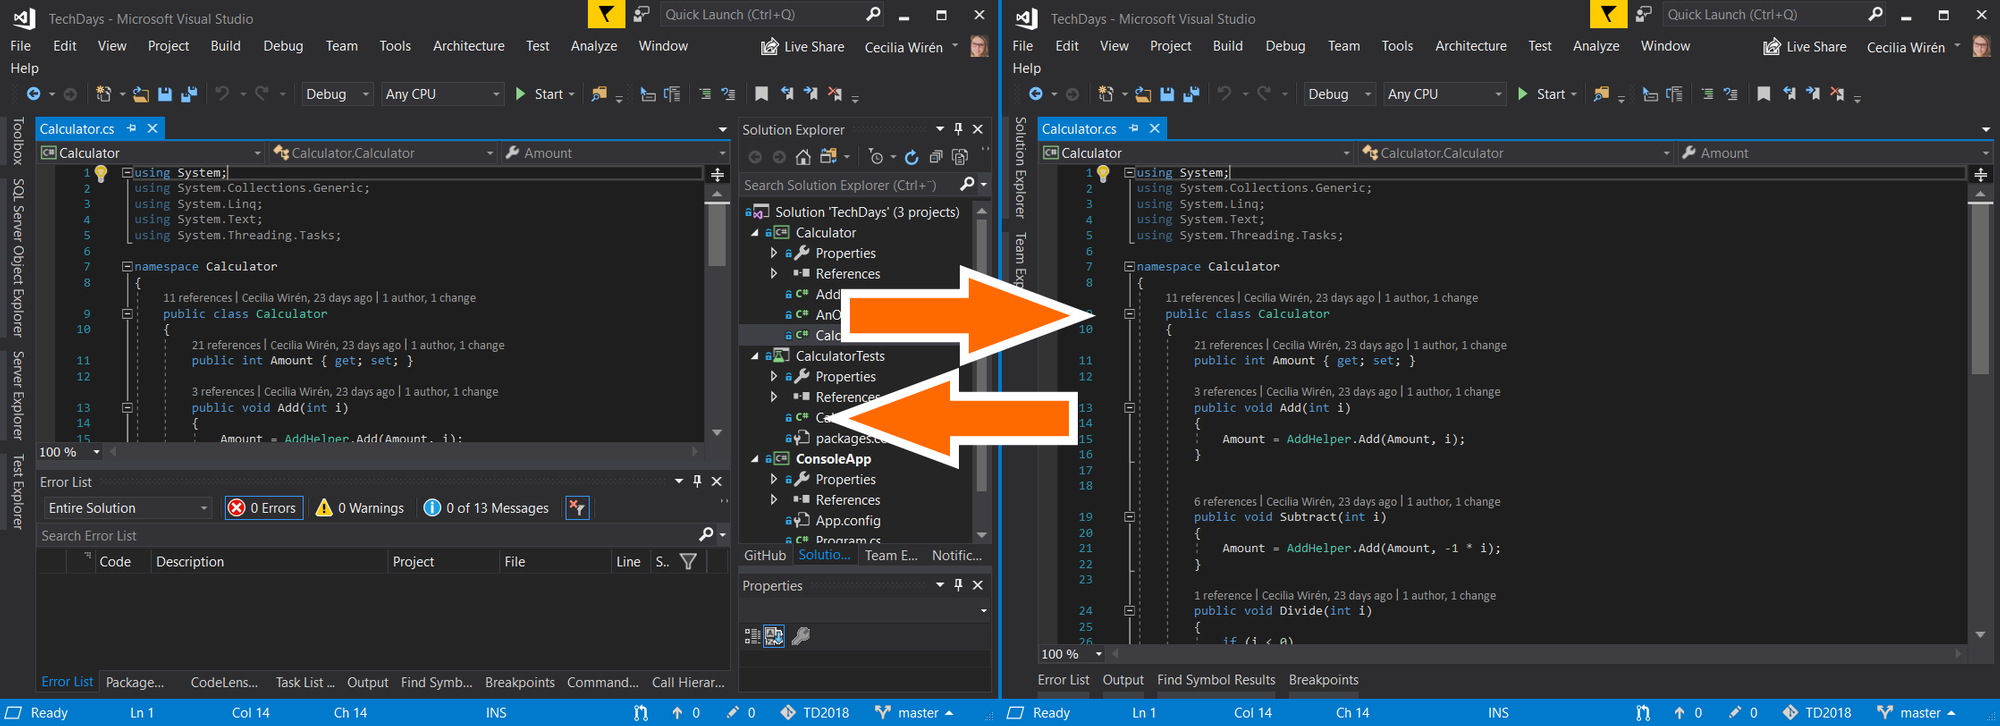 Save Visual Studio layouts and switch between them